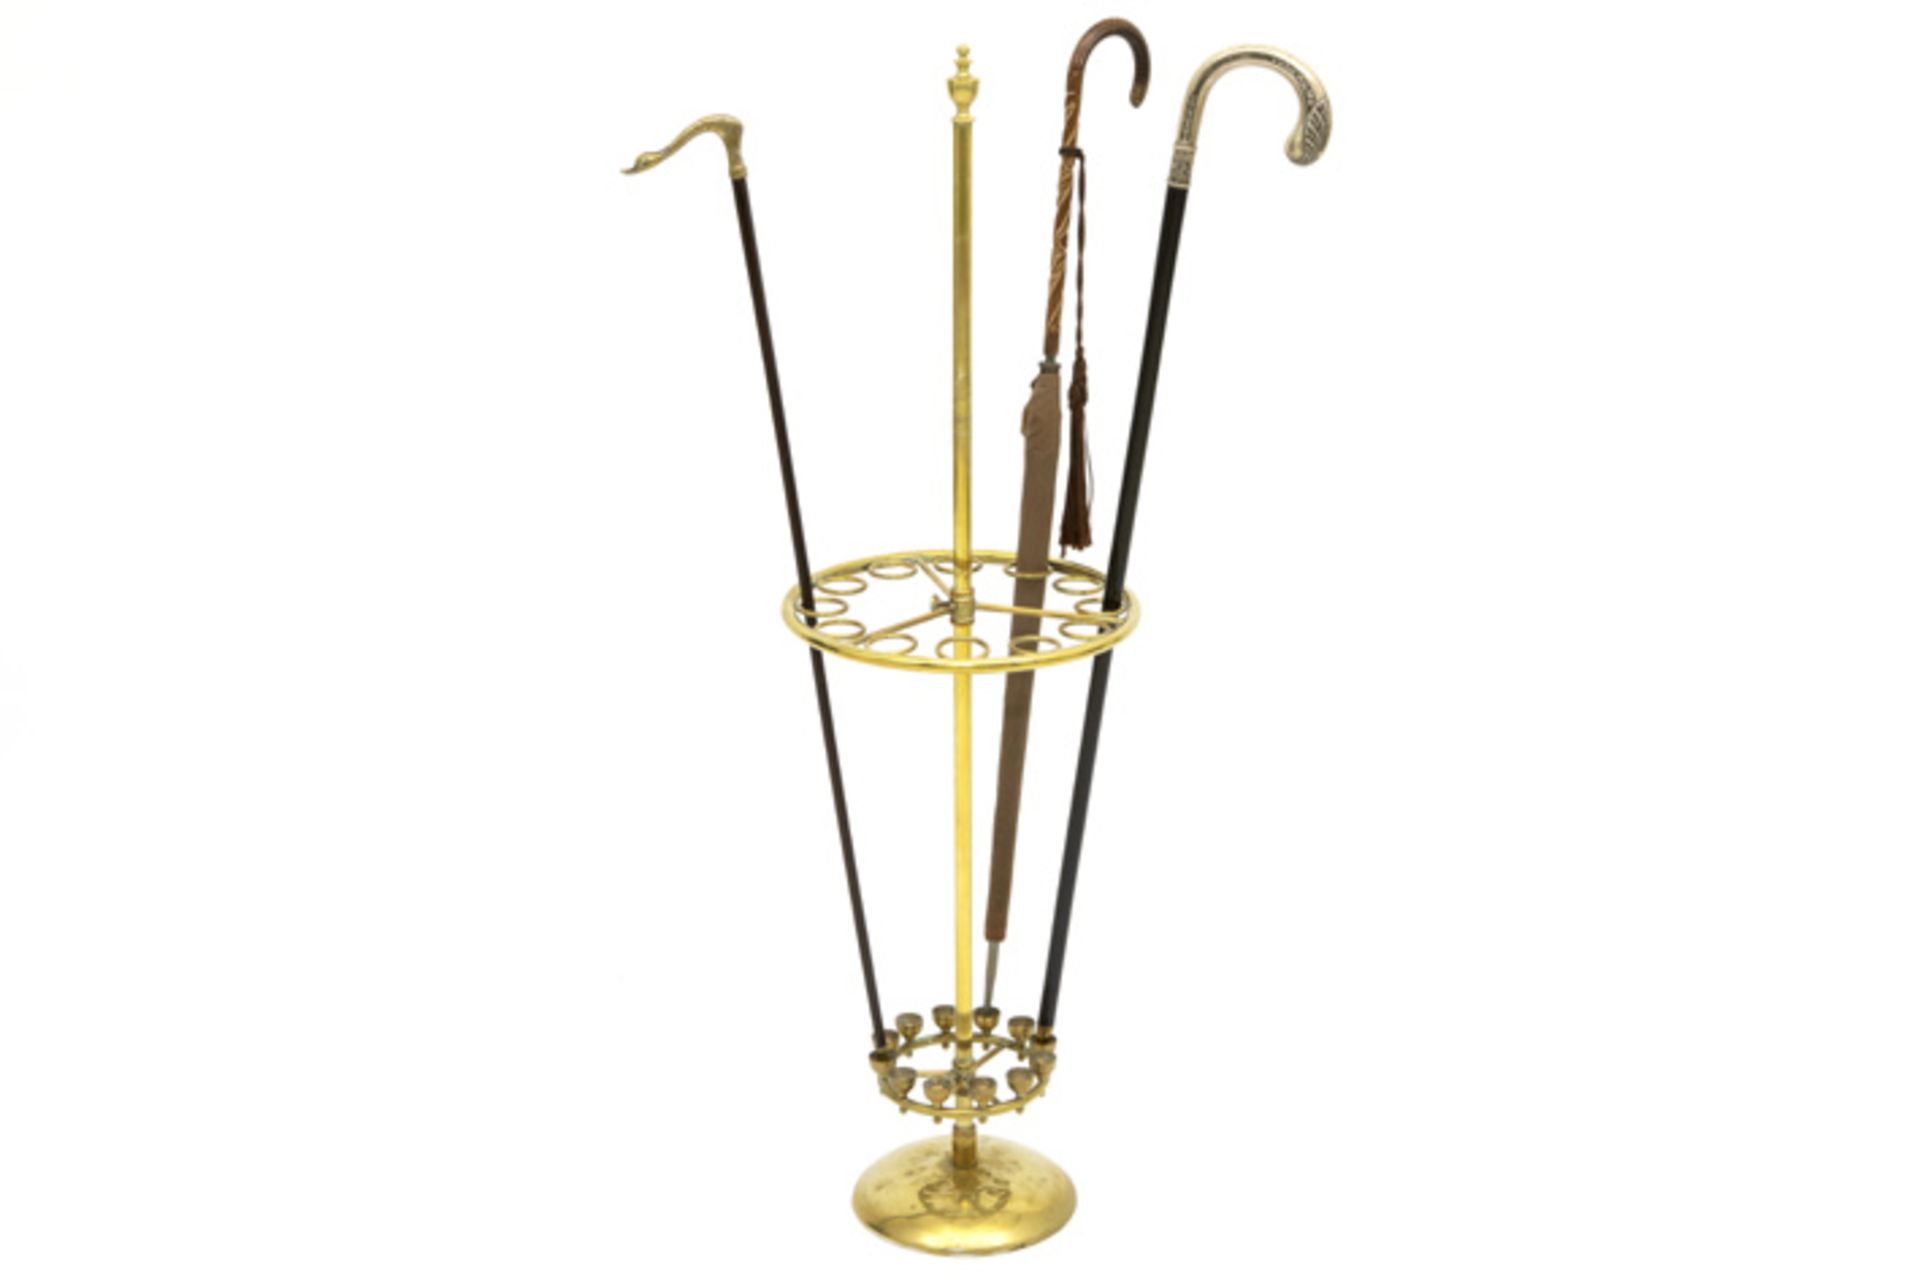 walking stick stand with an antique umbrella and two walking sticks with silver grip || Lot met